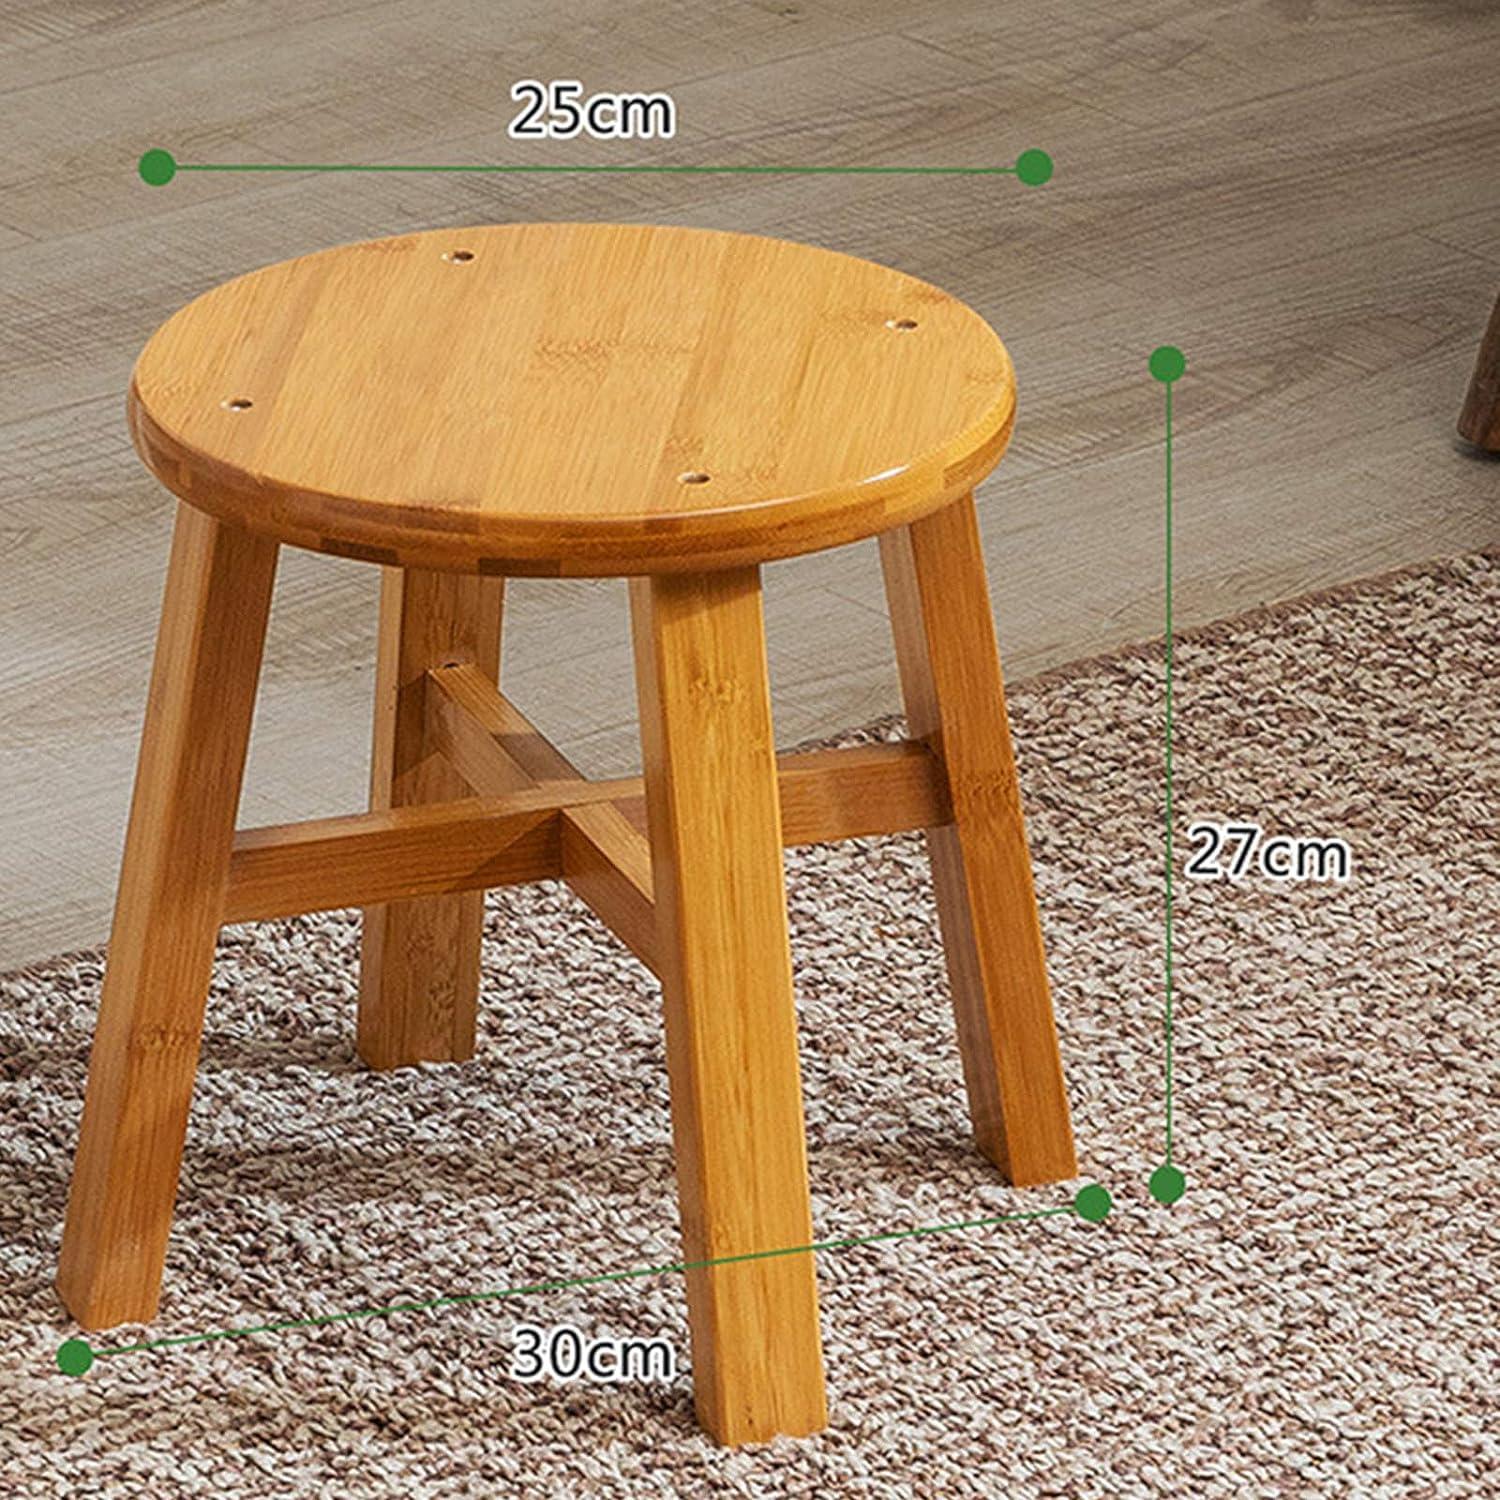 Bamboo Step Stool Shoe-Changing Round Foot Stool Multi-Functional Wooden  Stool Dibiao for Shower Leg Shaving Foot Rest Small